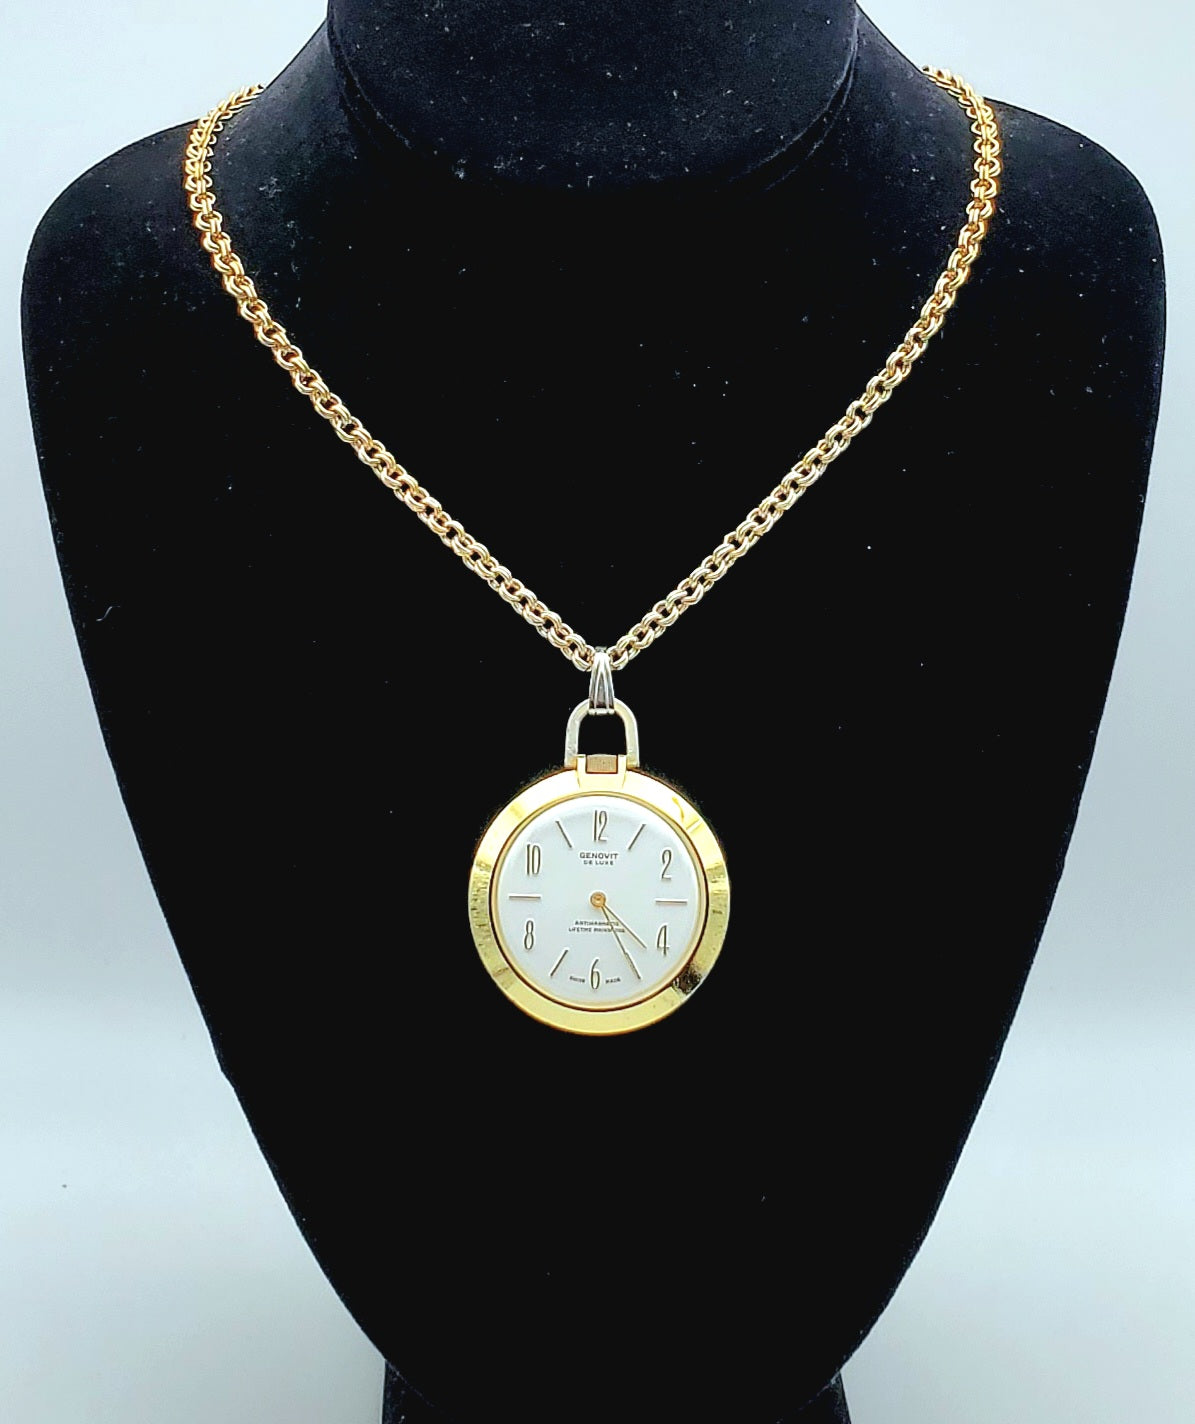 Genovit - De Luxe Antimagnetic Mainspring Gold Tone Watch on Gold Tone Chain Necklace - 29"